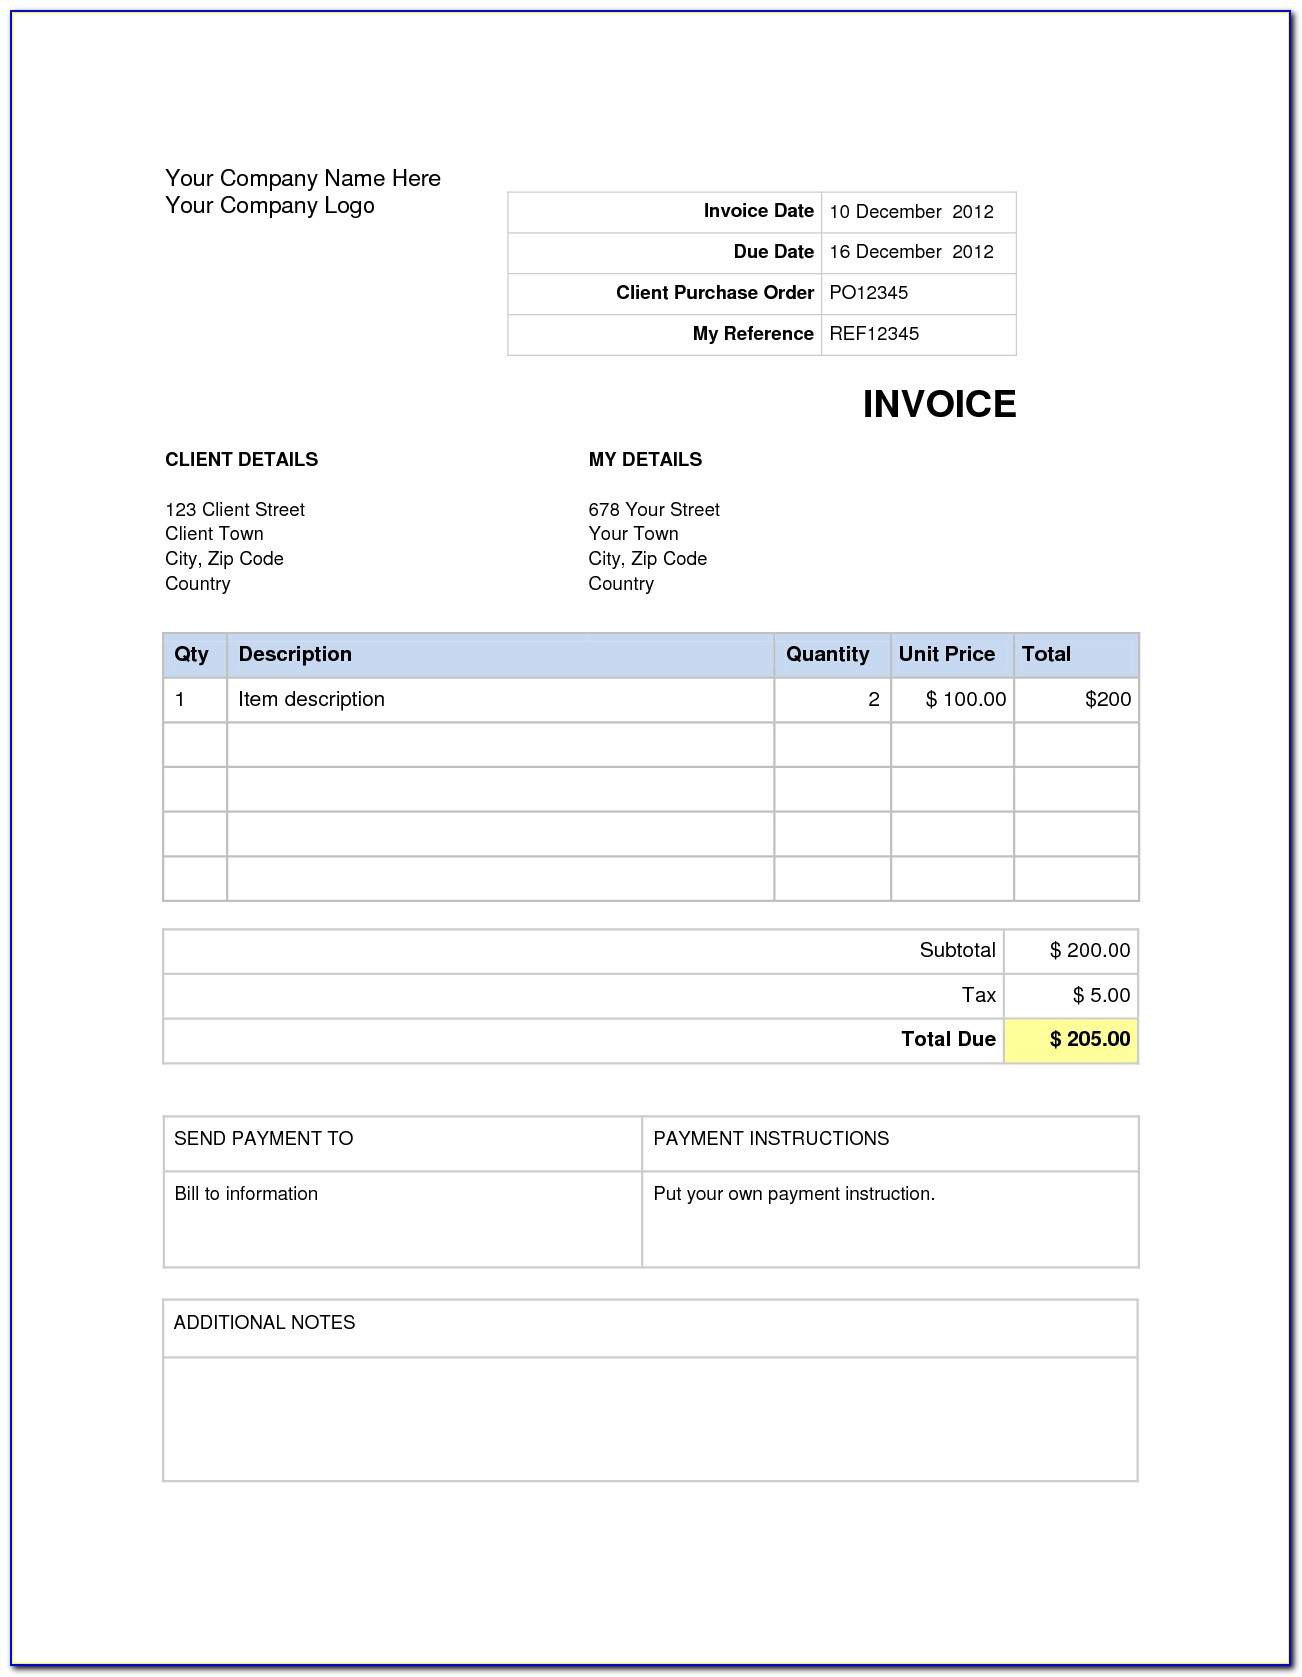 Invoice Format In Word Doc